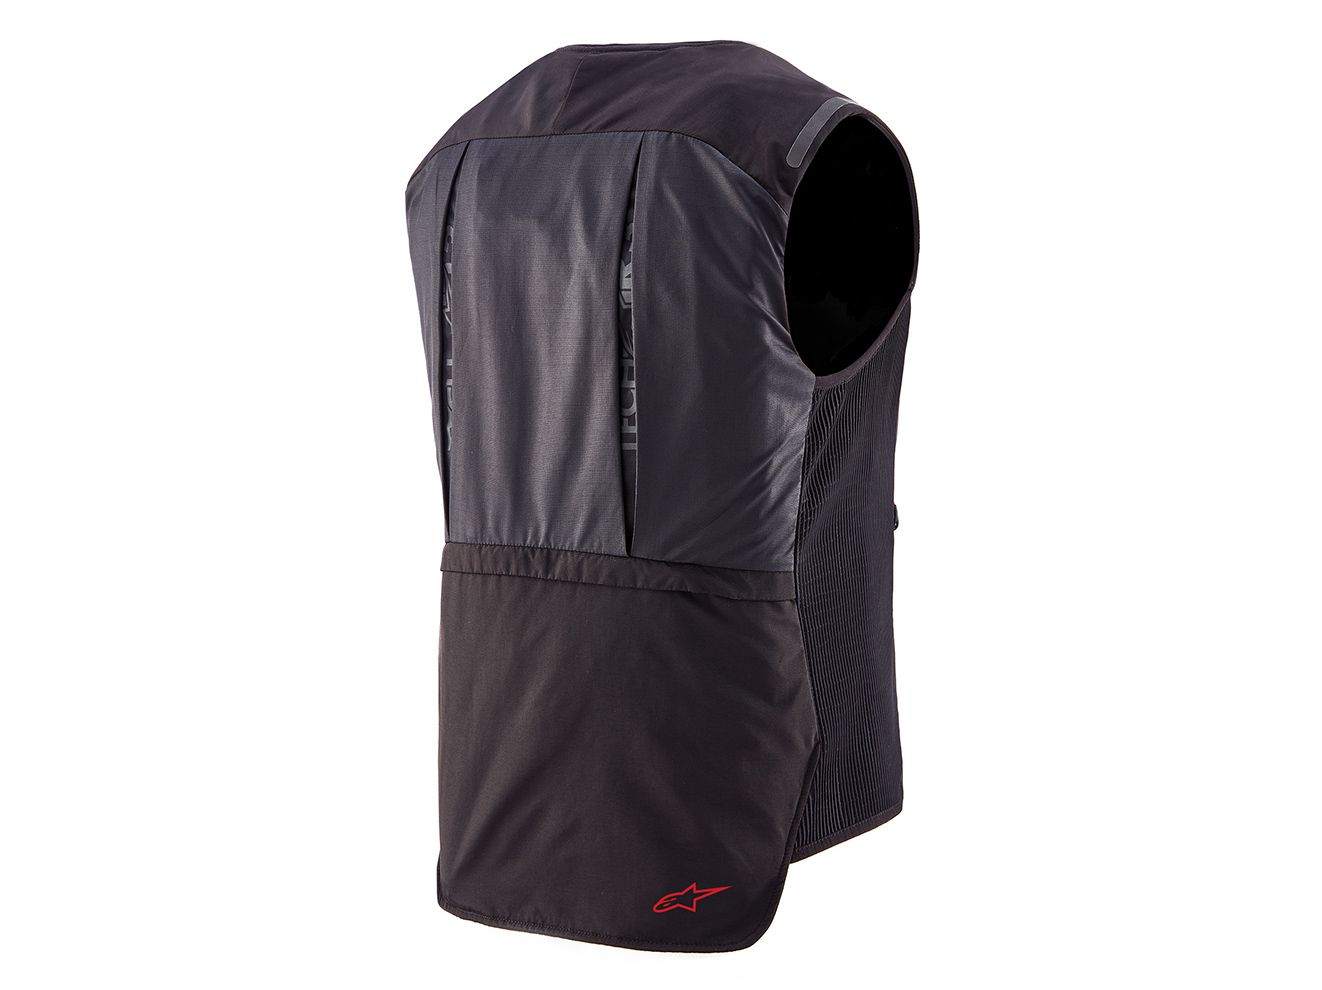 The Tech-Air 3 is made to fit over or under a standard riding jacket.